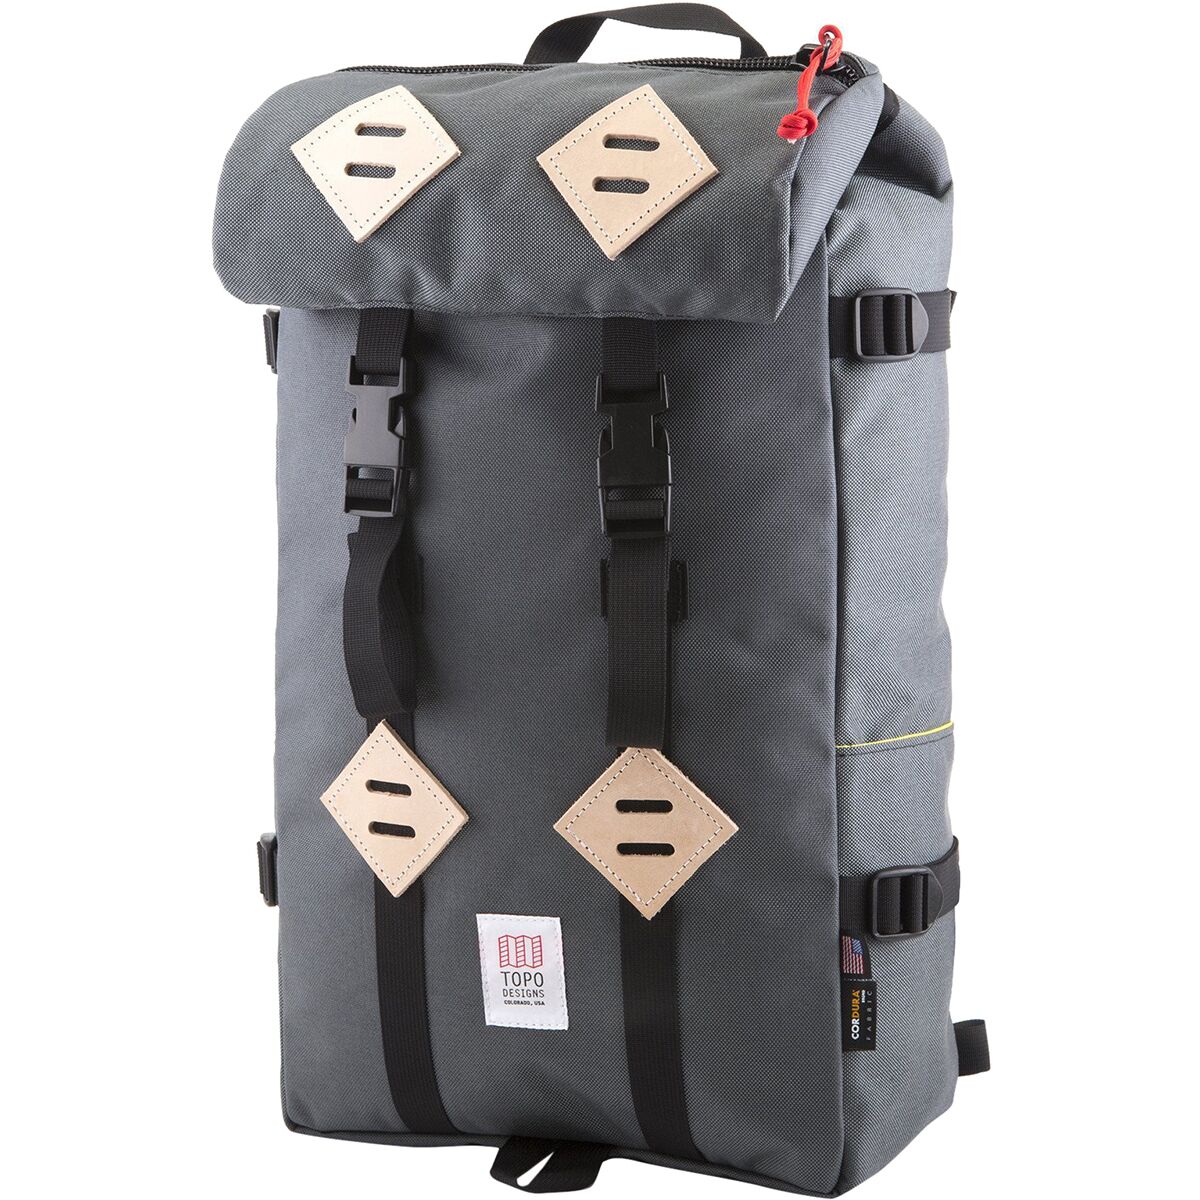 Topo Designs Klettersack Leather Charcoal/Leather bags Topo Designs 